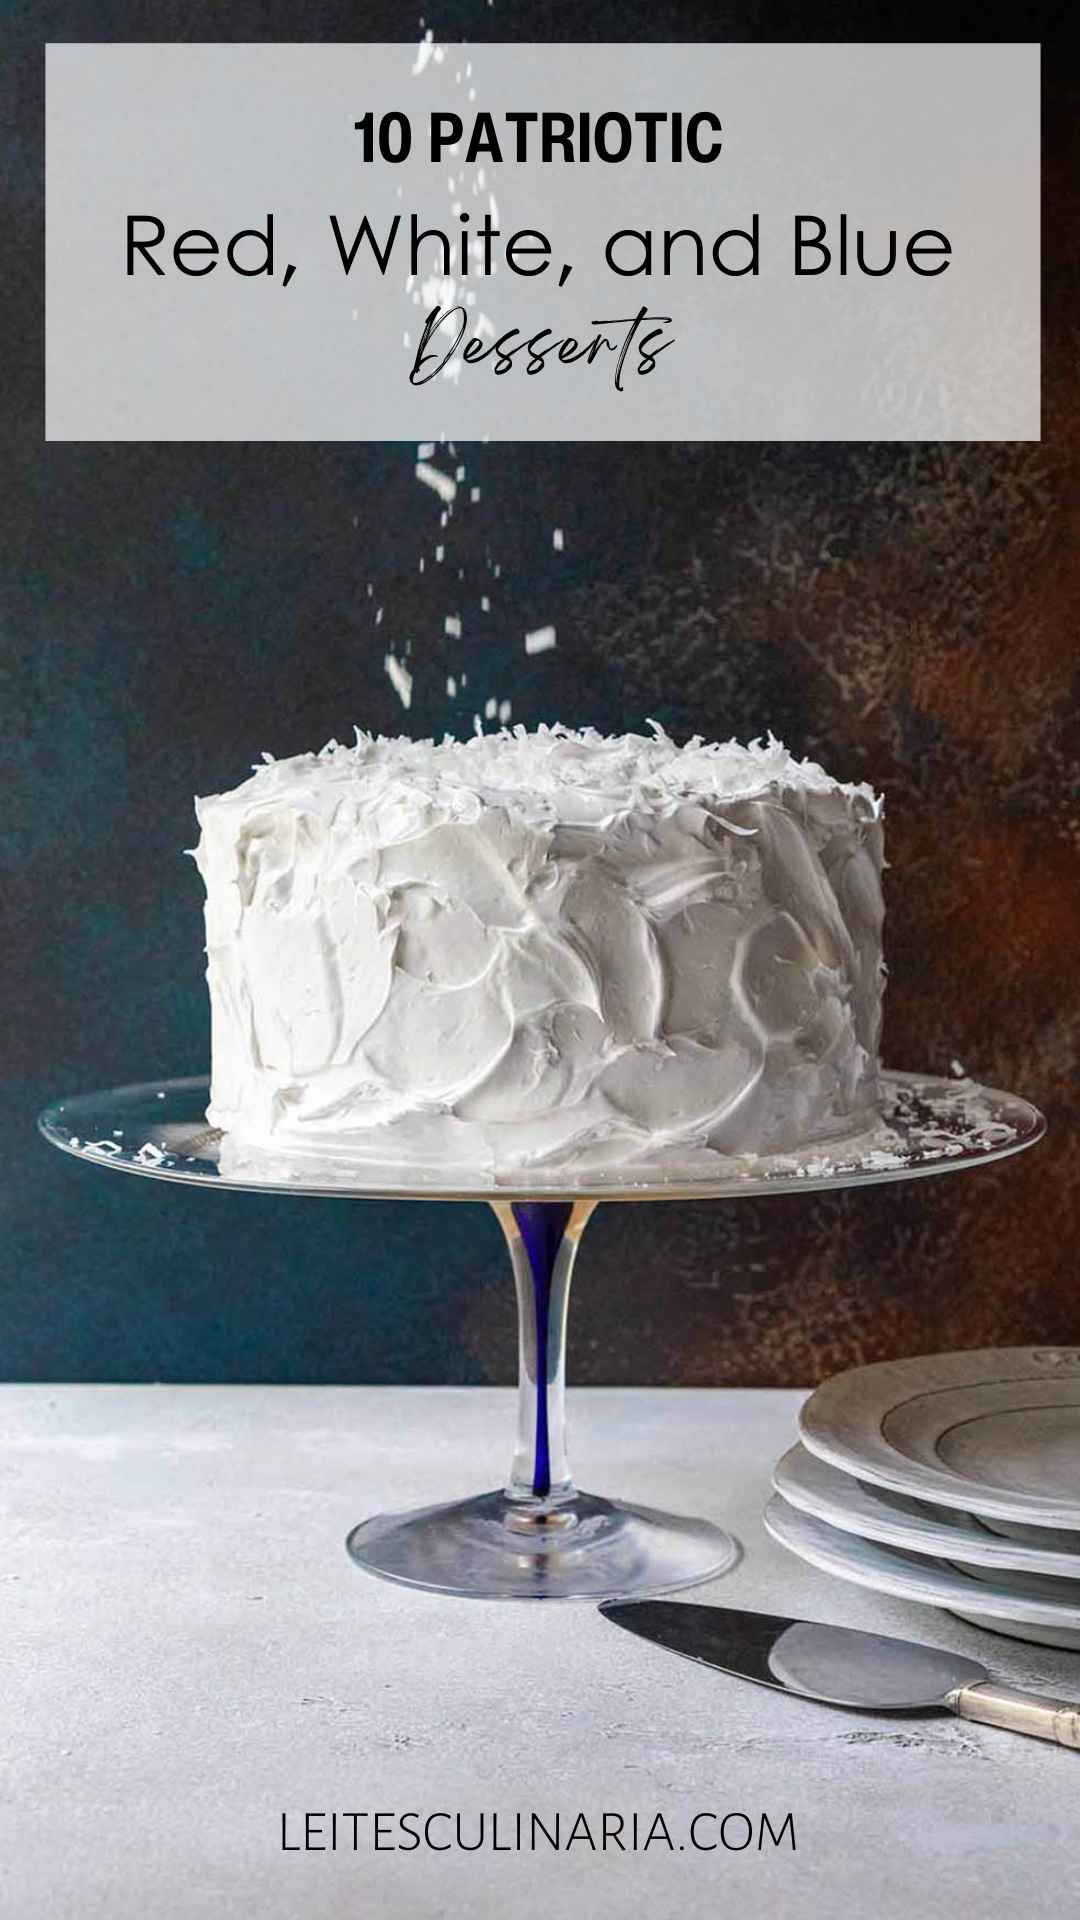 A cake covered in white frosting with coconut flakes falling onto it.